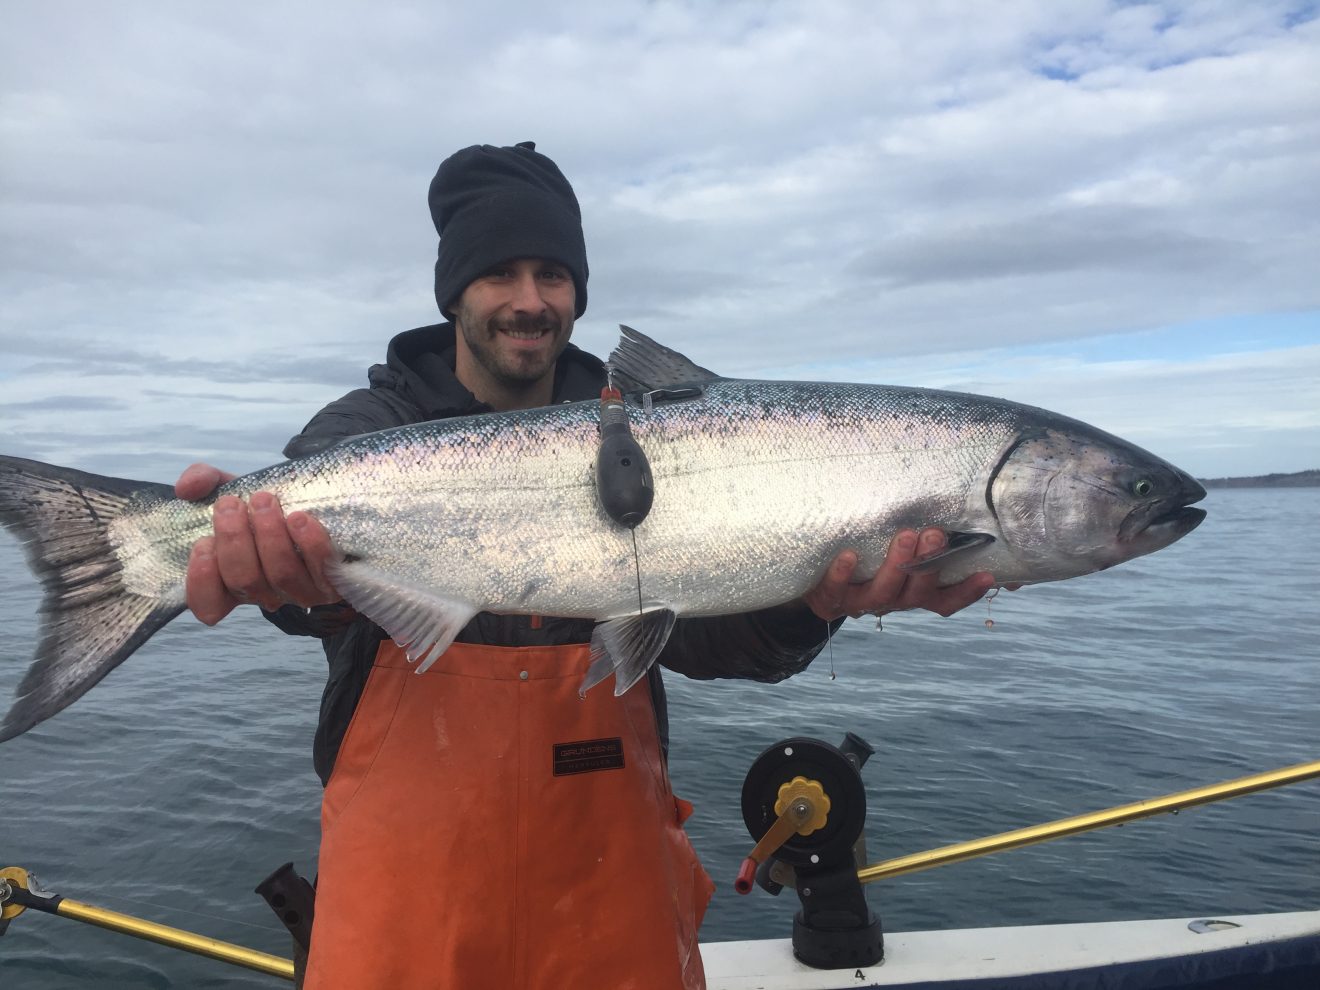 Satellite tags reveal what's eating older chinook salmon